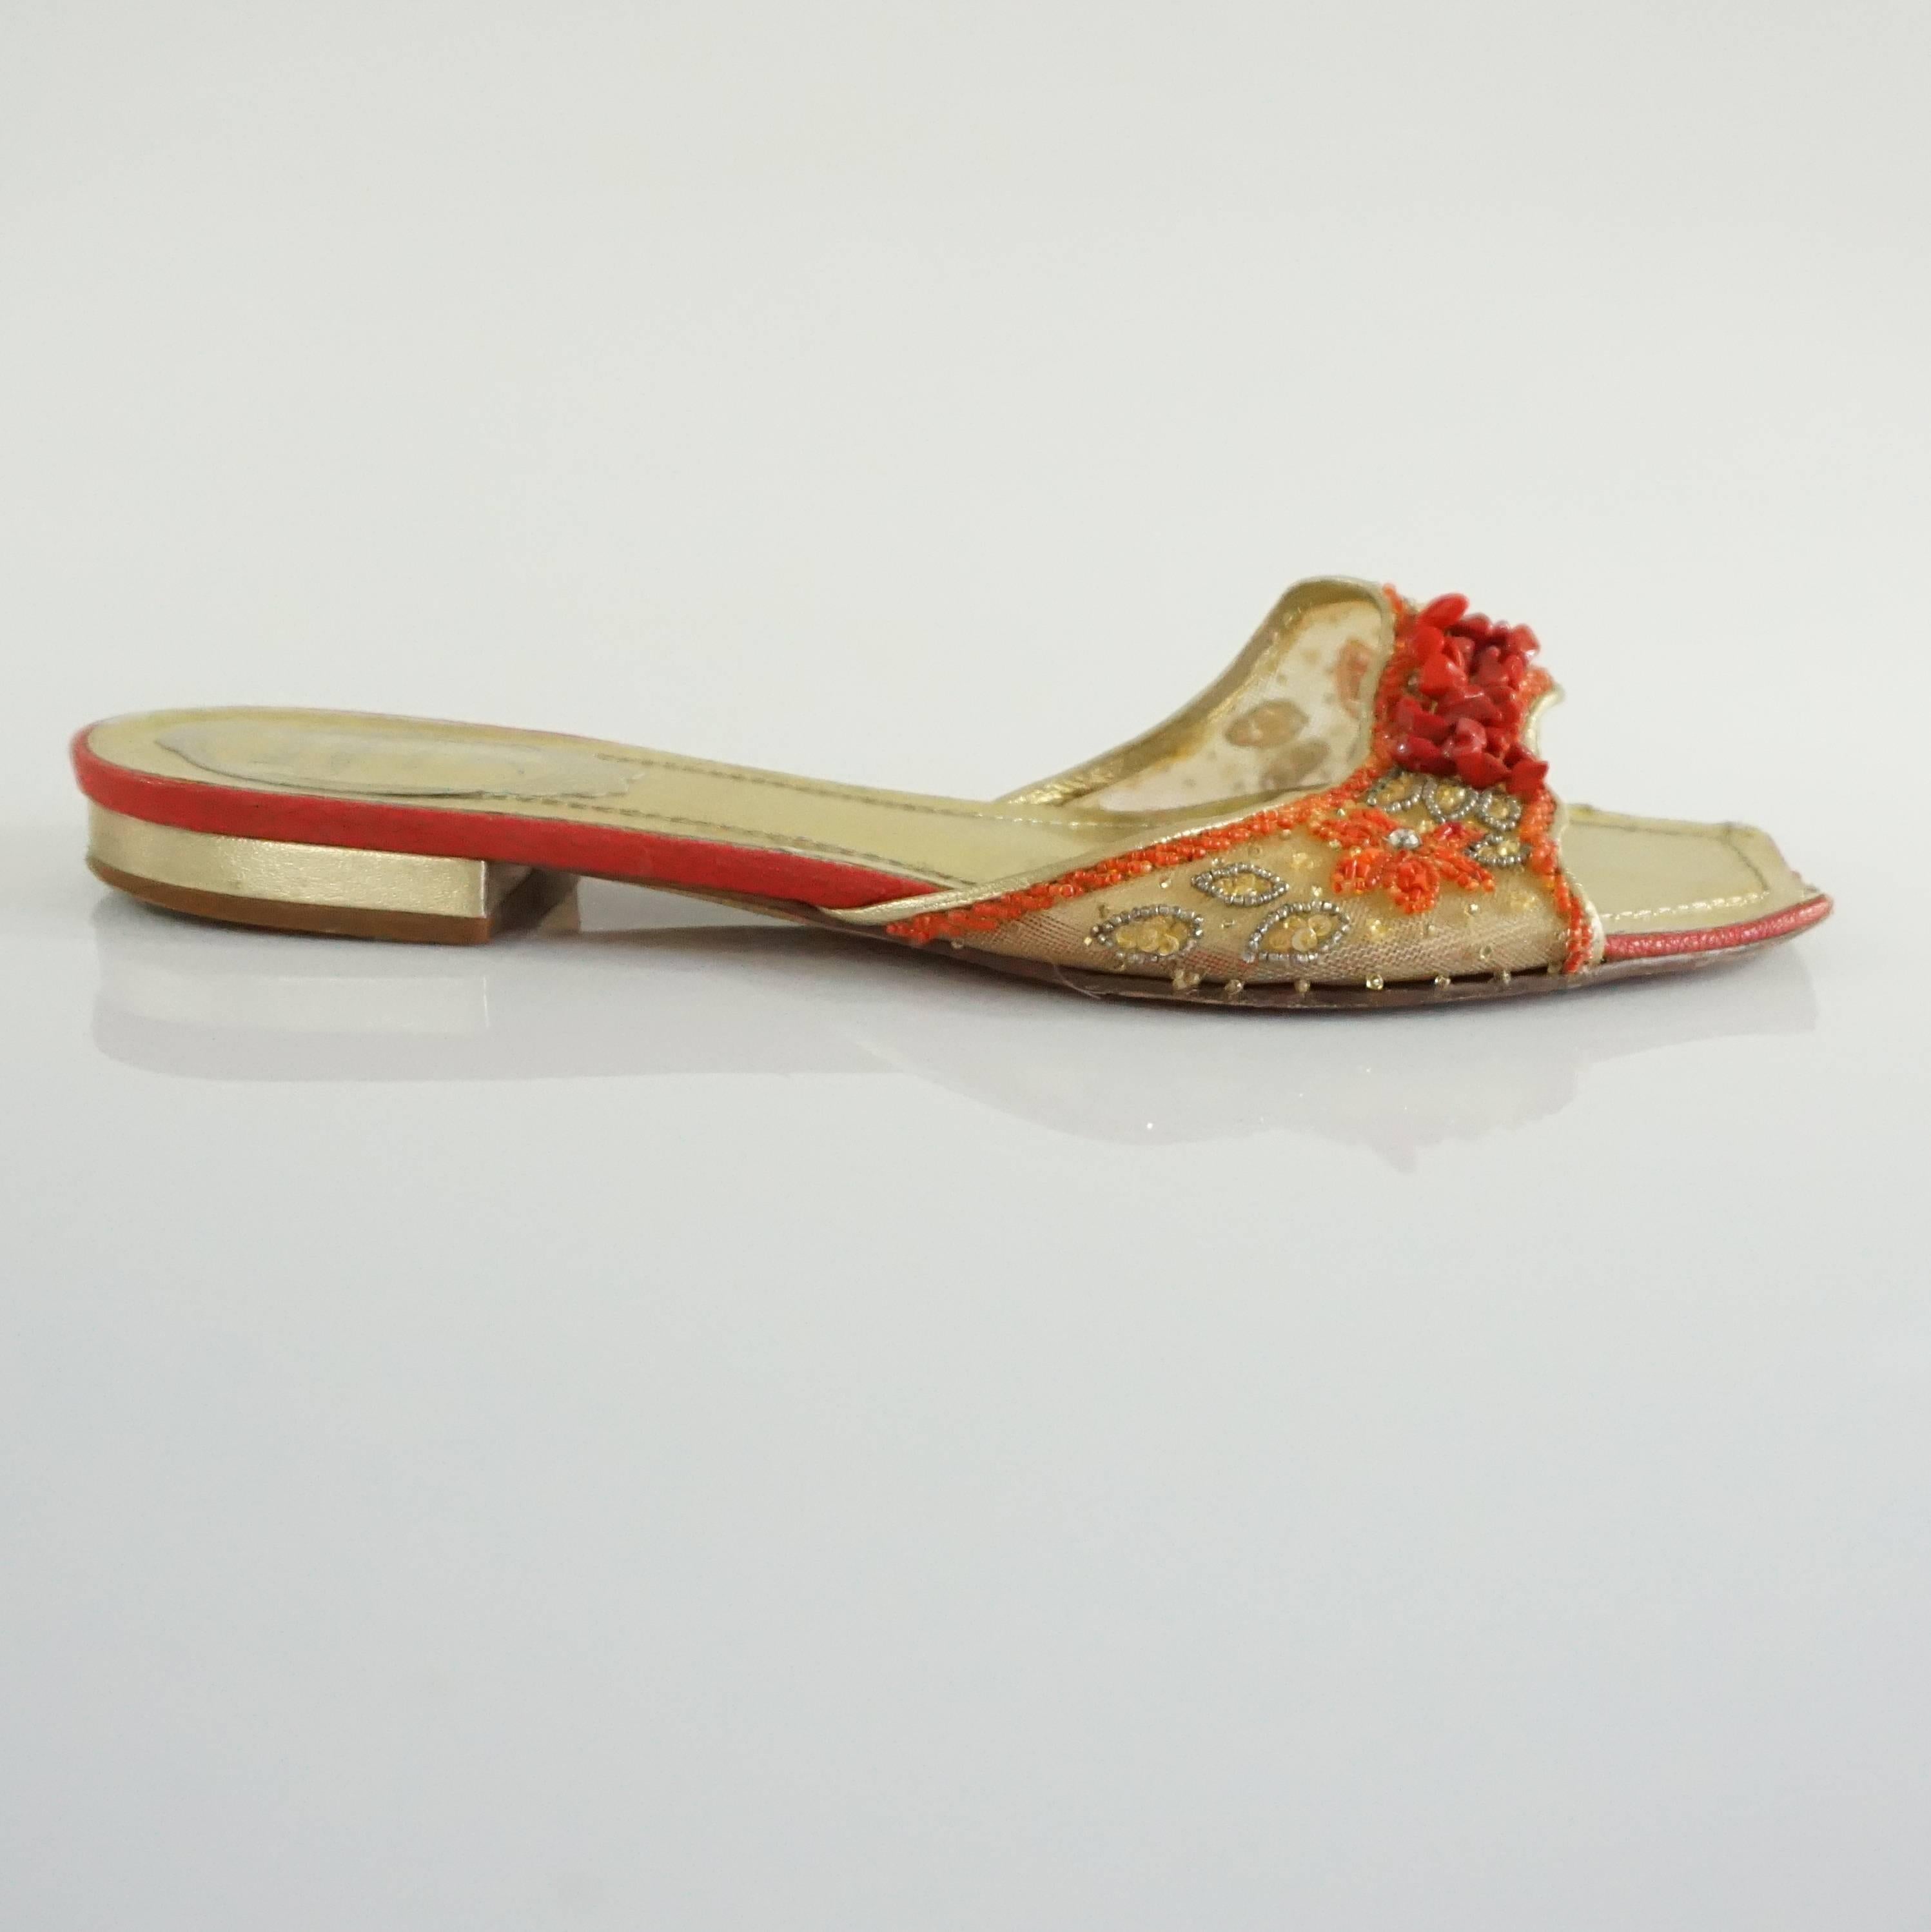 These Rene Caovilla mesh beaded slides are gold and red. They have bedazzlement on the band. They are in good condition with wear on the bottom and scuffing on the front.

Heel Measurement: 0.5